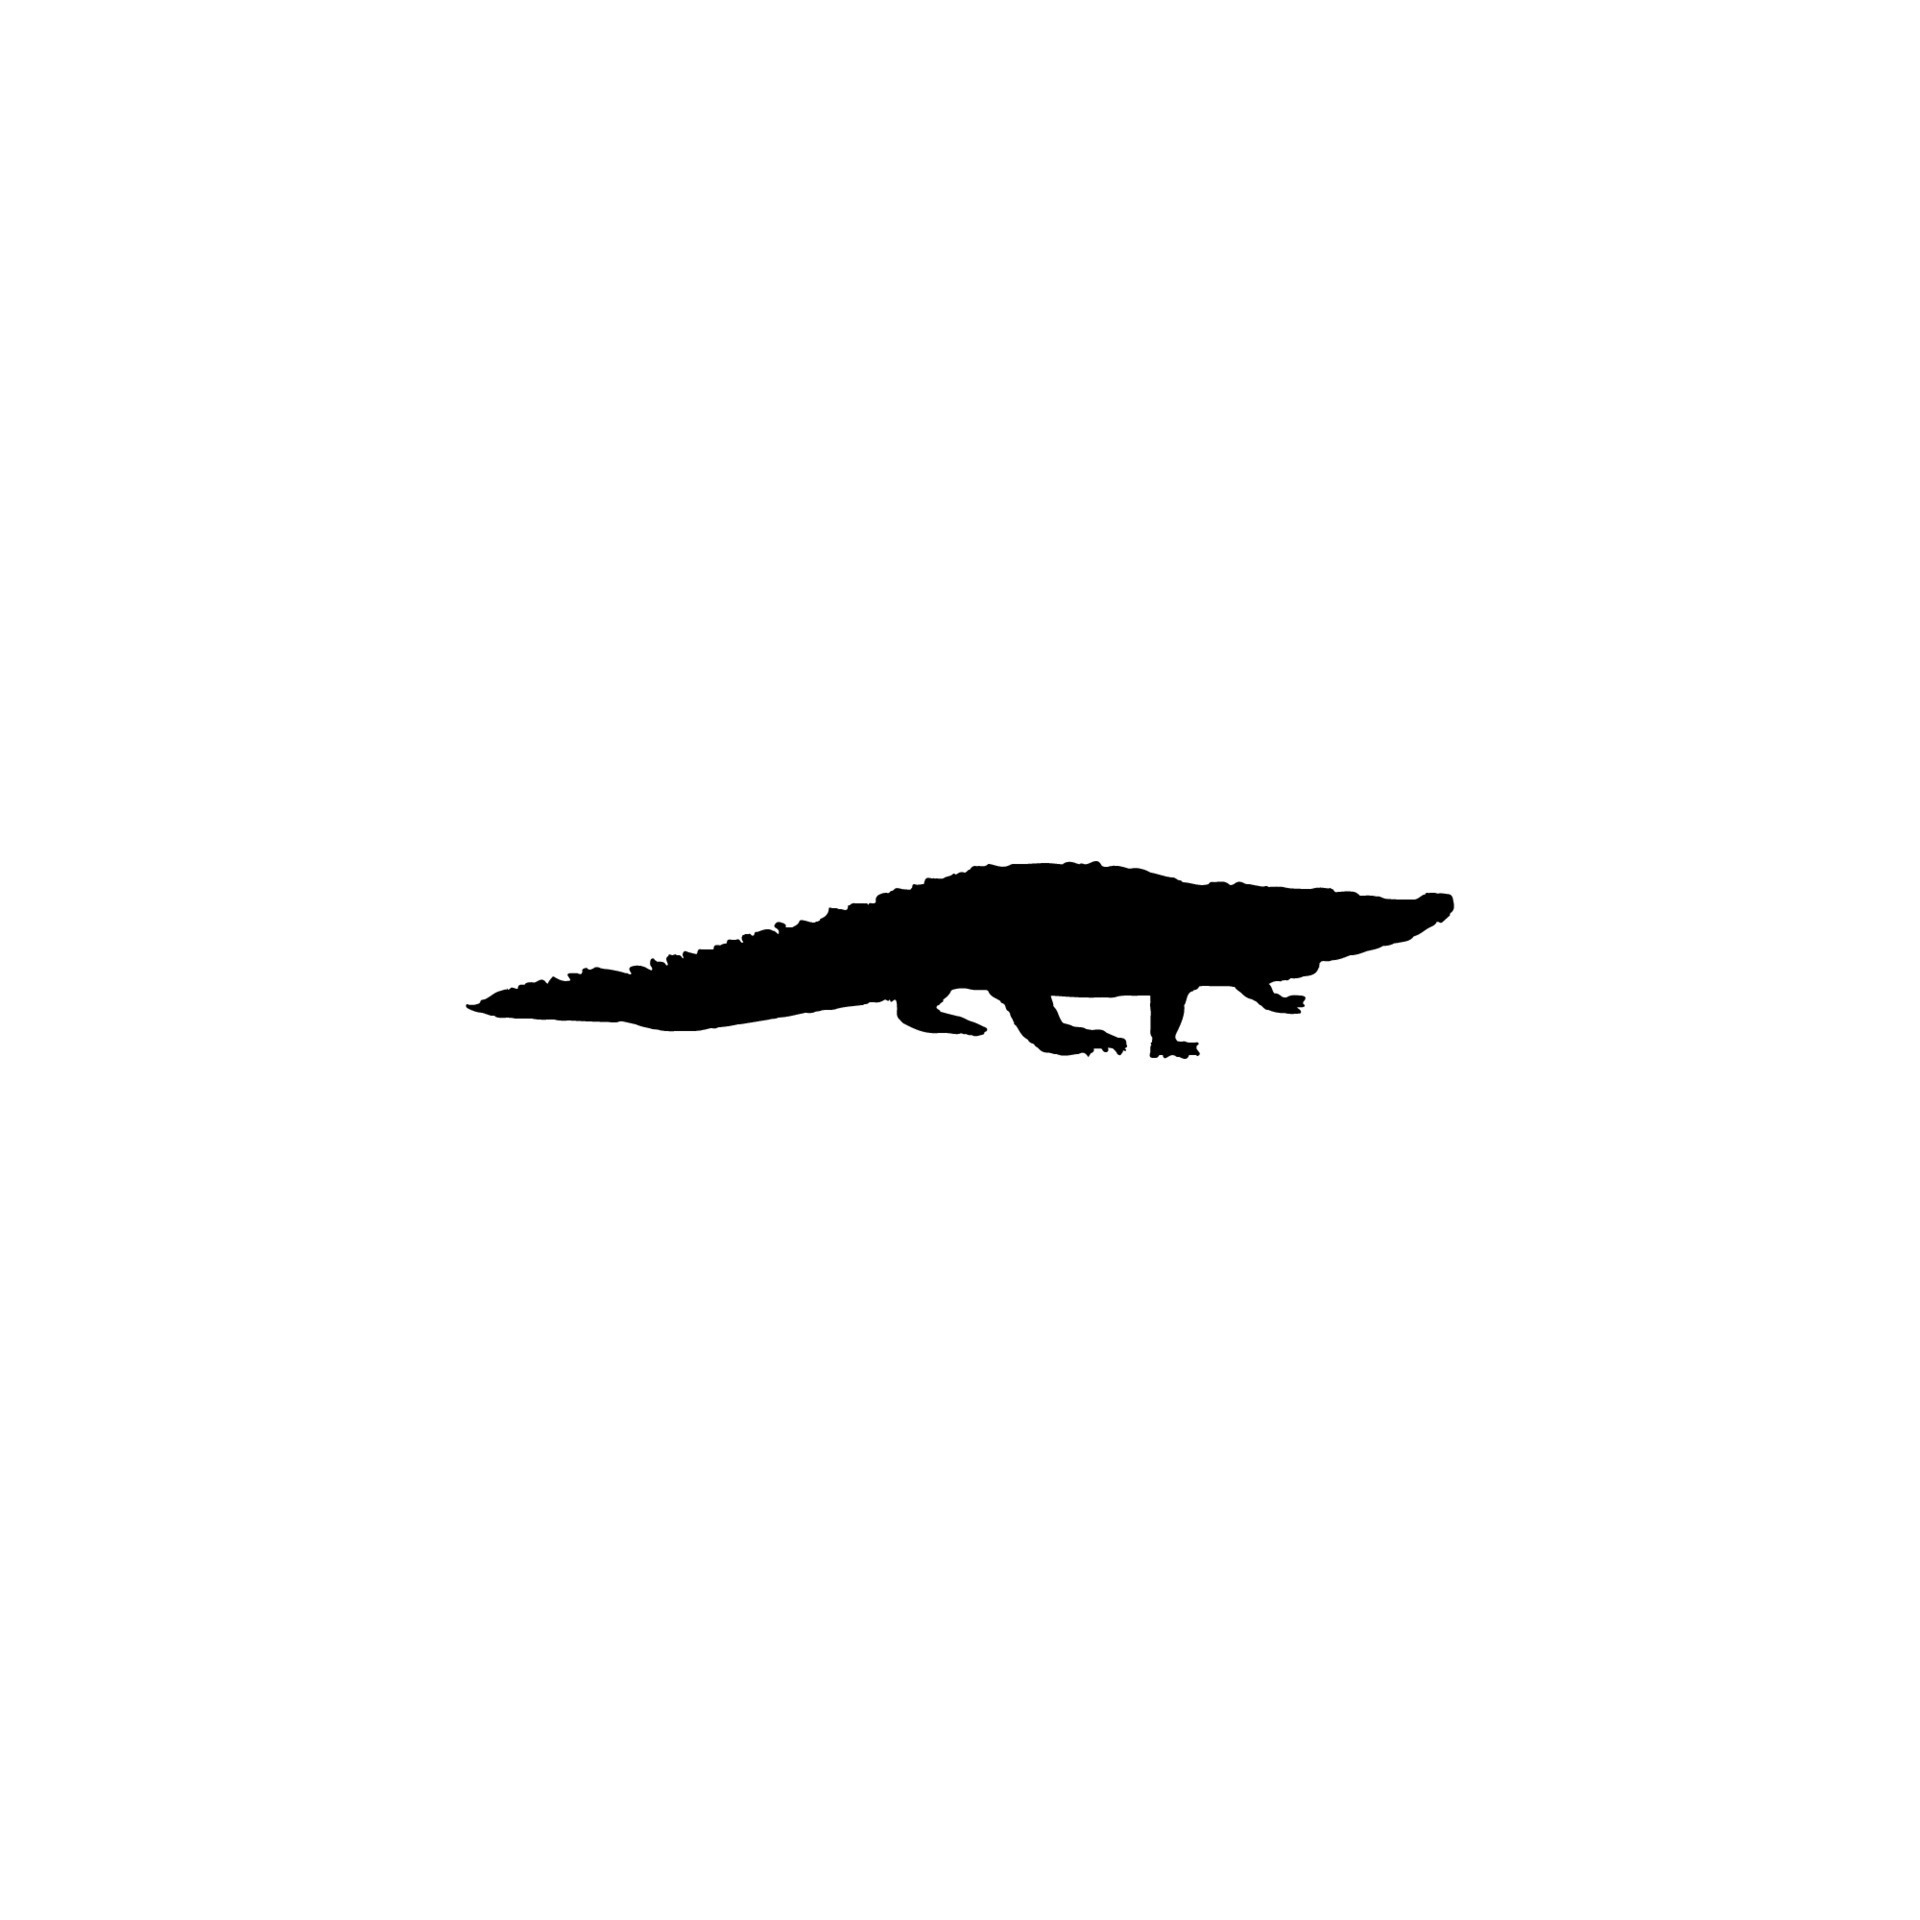 https://static.vecteezy.com/system/resources/previews/017/625/304/original/crocodile-icon-simple-style-zoology-science-poster-background-symbol-crocodile-brand-logo-design-element-crocodile-t-shirt-printing-for-sticker-vector.jpg